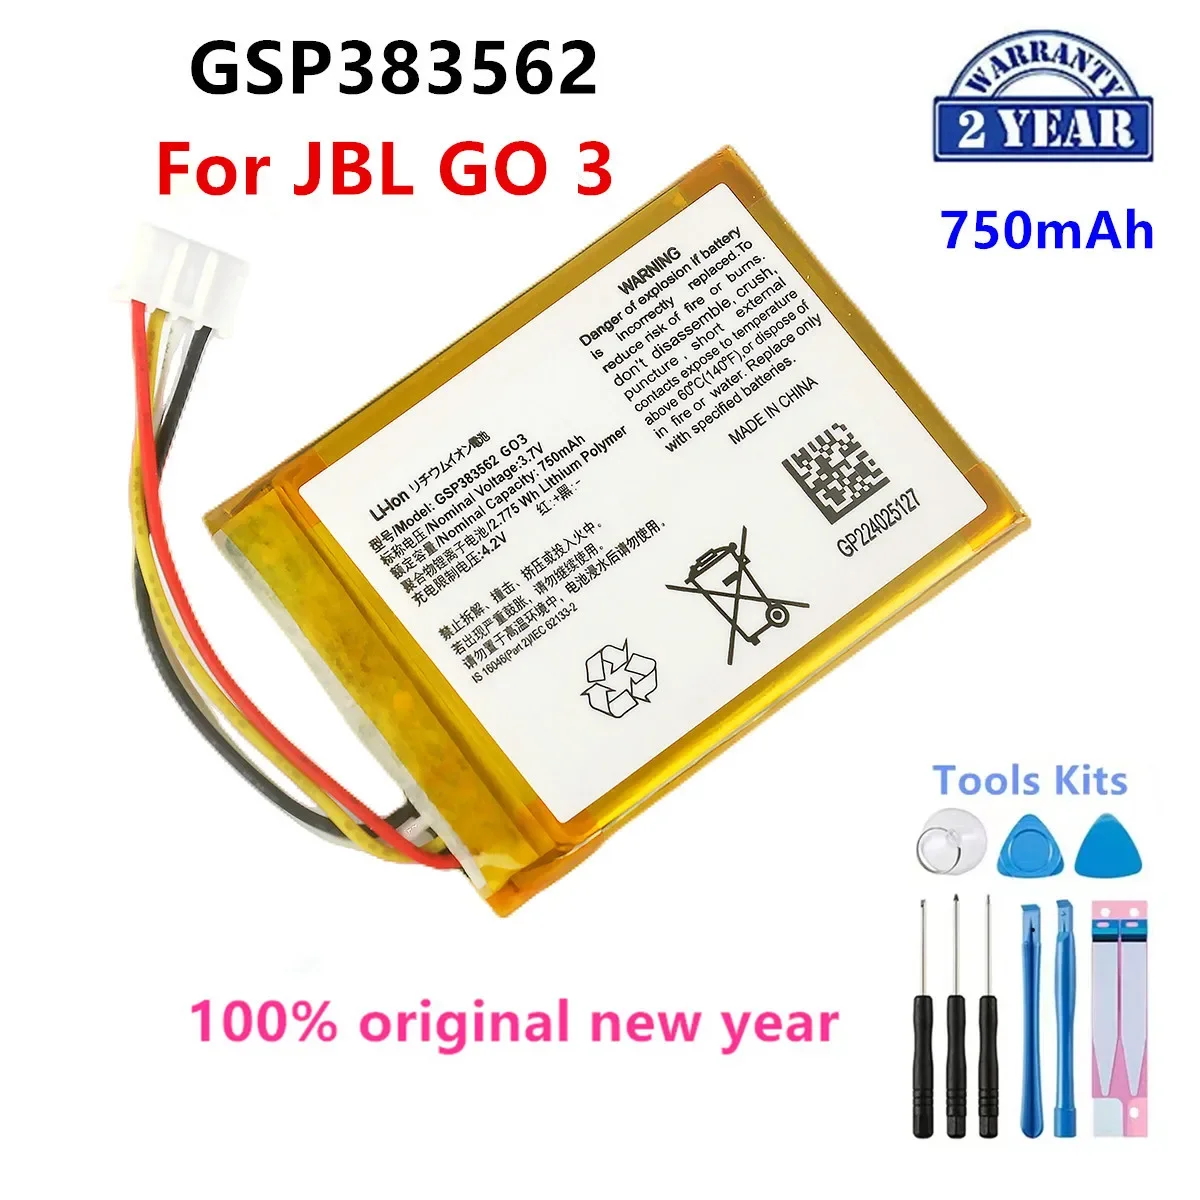 

Original GSP383562 New Replacement 750mAh For JBL Go 3/GO3 324054 Bluetooth Speaker Replacement Battery+Tools.